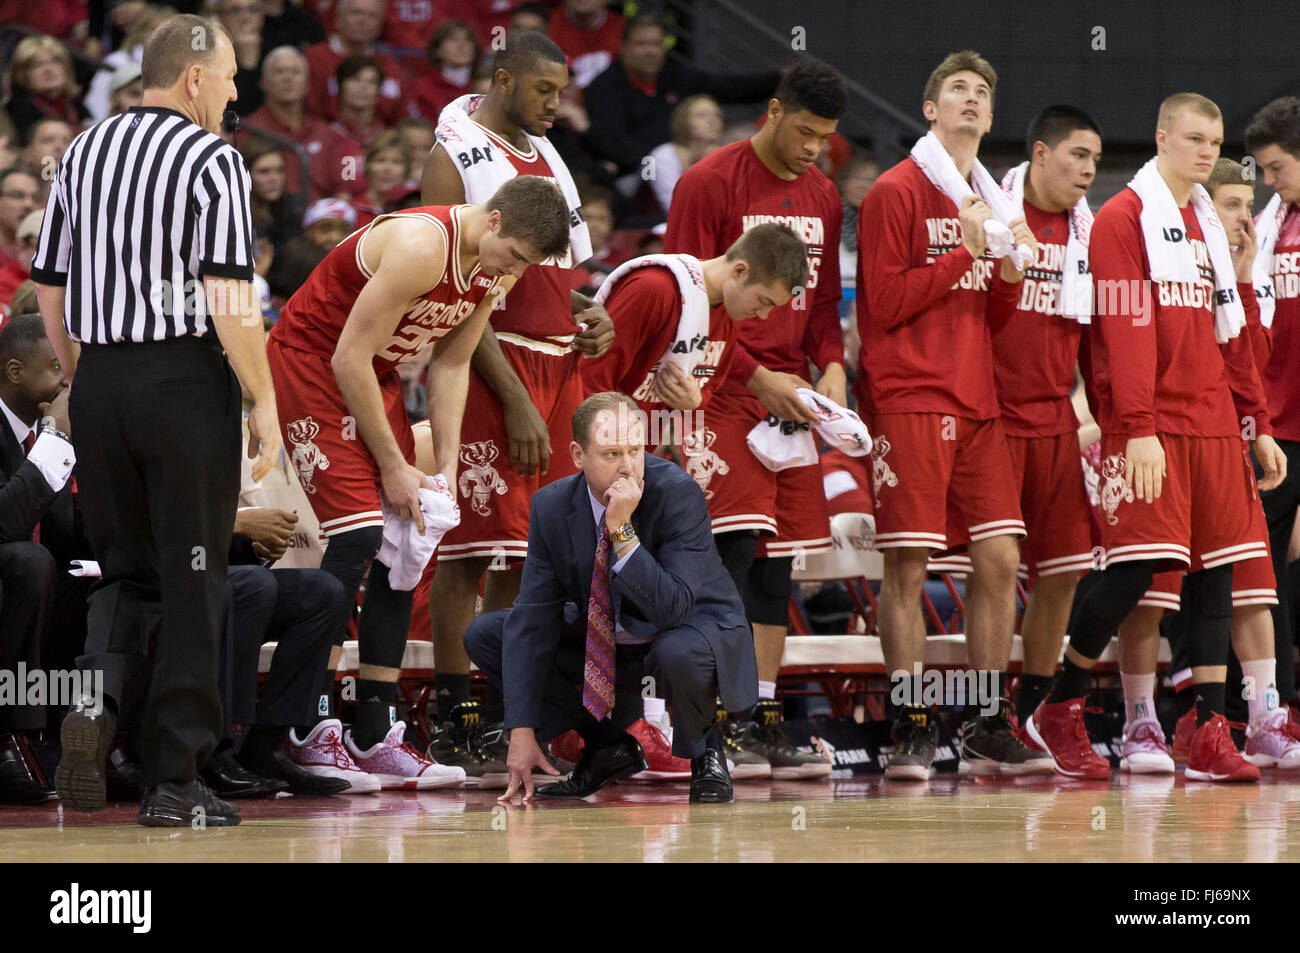 Madison, WI, USA. 28th Feb, 2016. Wisconsin coach Greg Gard looks on during the NCAA Basketball game between the Michigan Wolverines and the Wisconsin Badgers at the Kohl Center in Madison, WI. Wisconsin defeated Michigan 68-57. John Fisher/CSM/Alamy Live News Stock Photo